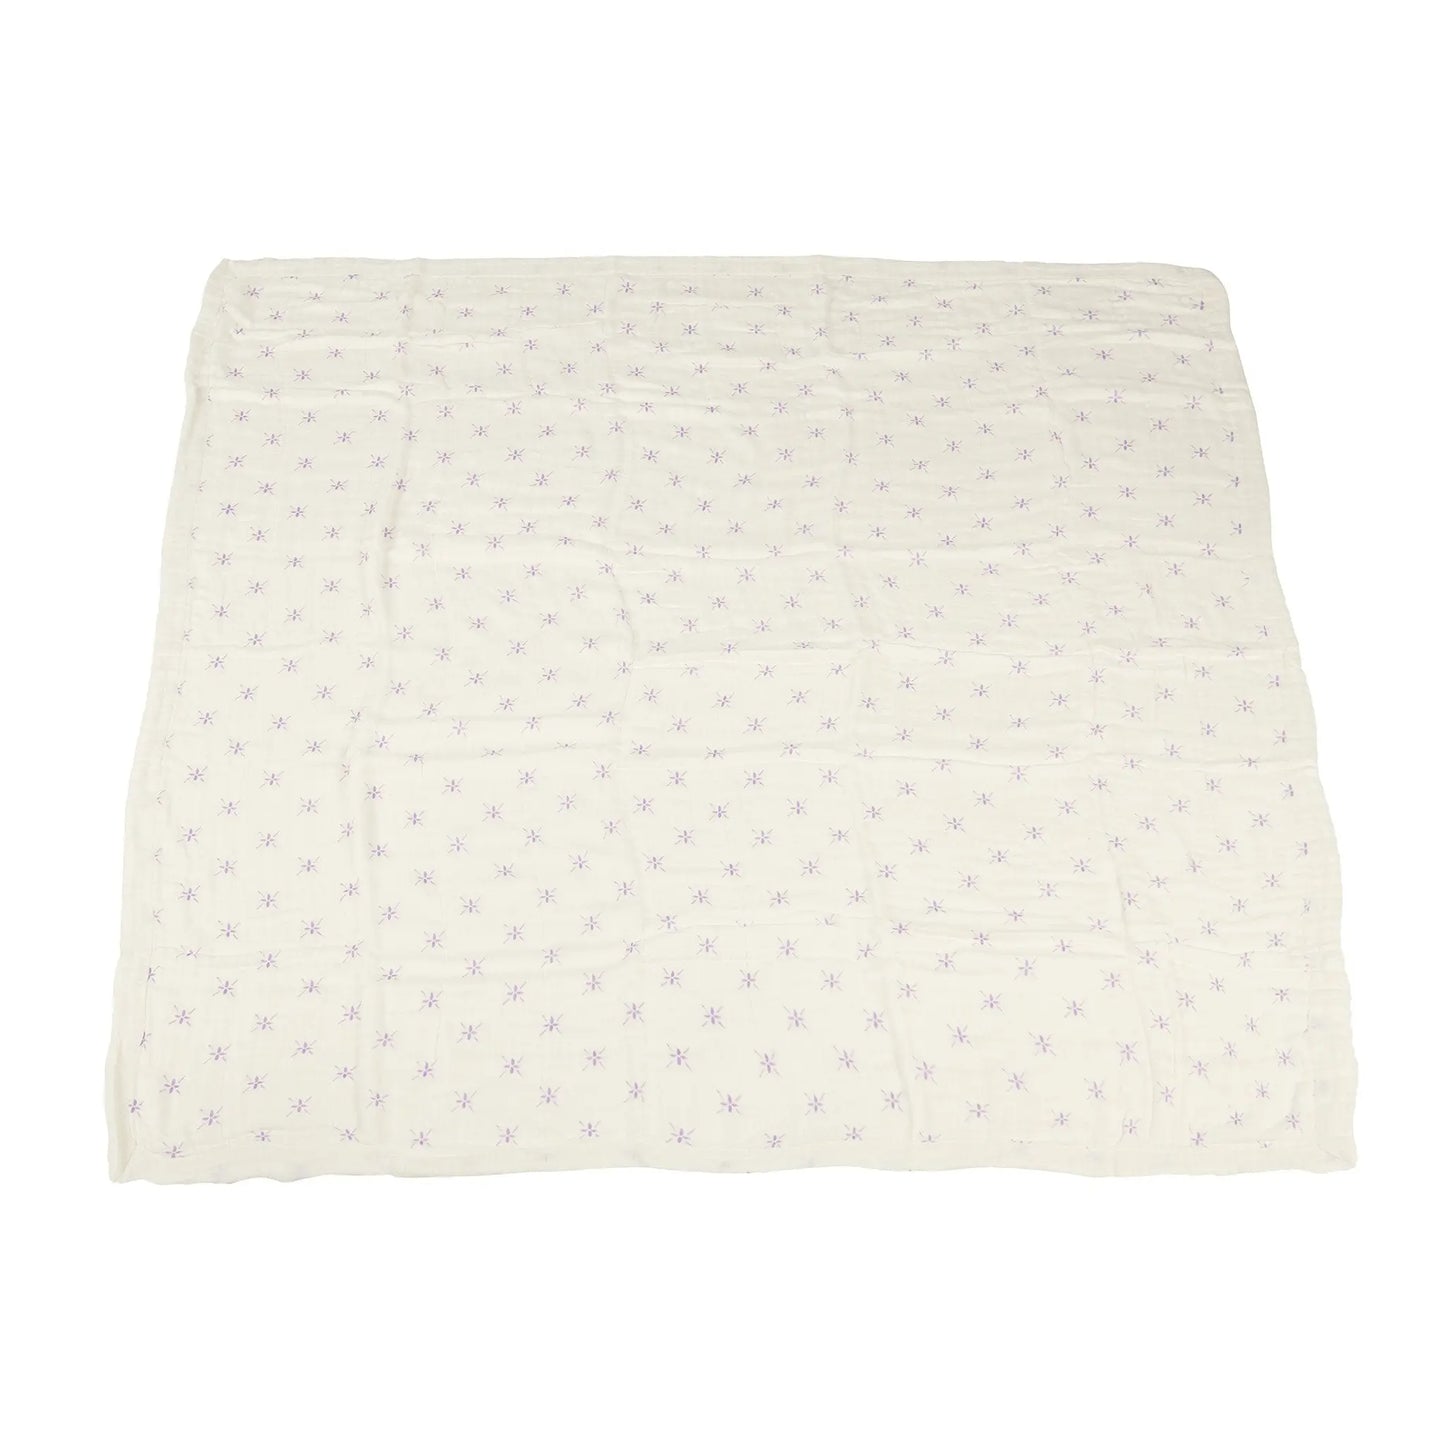 Lavender Flower and White Bamboo Muslin Newcastle Blanket Newcastle Classics